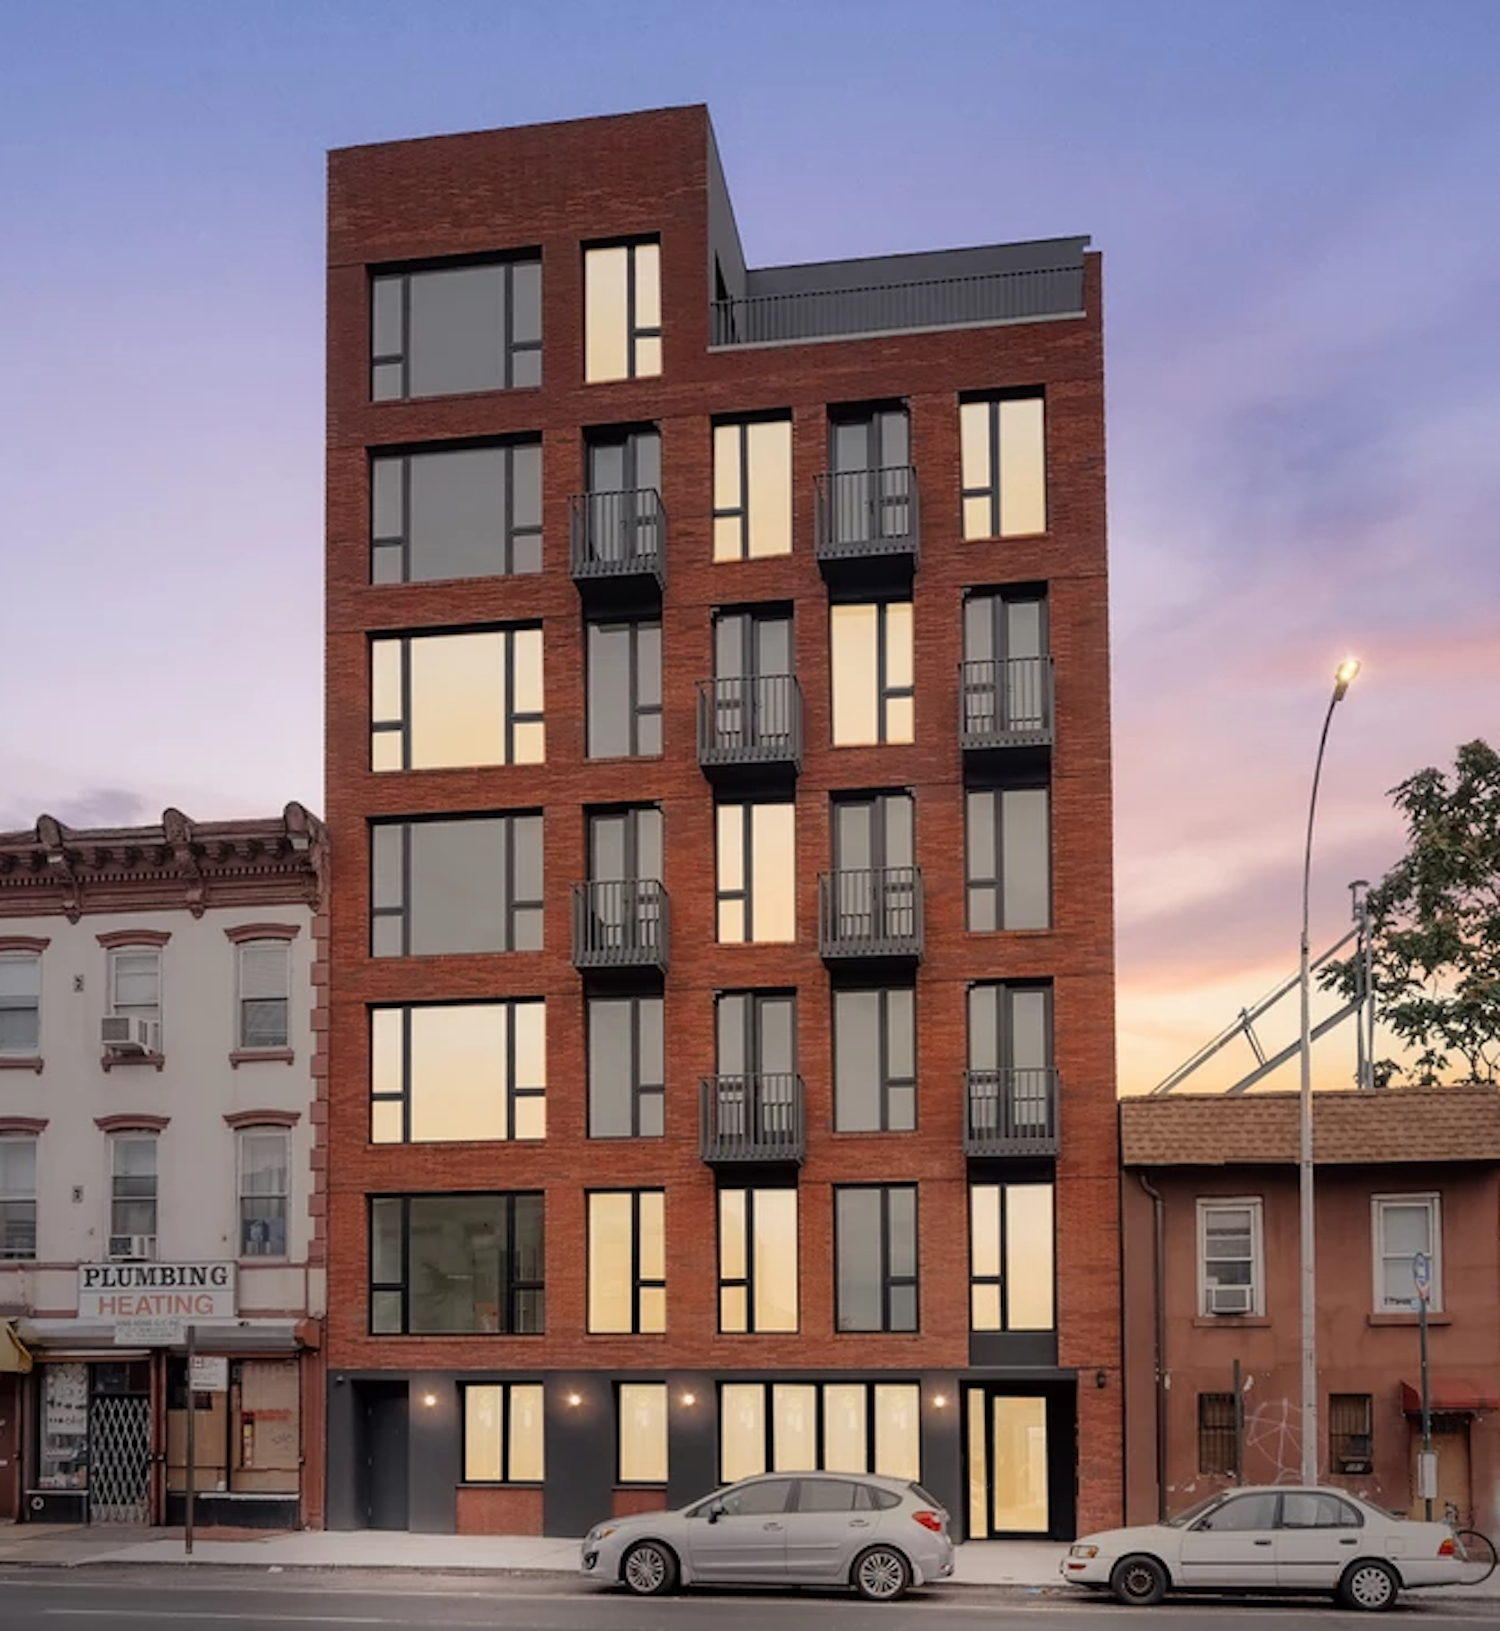 577 3rd Avenue in Gowanus, Brooklyn. All images via NY Housing Connect